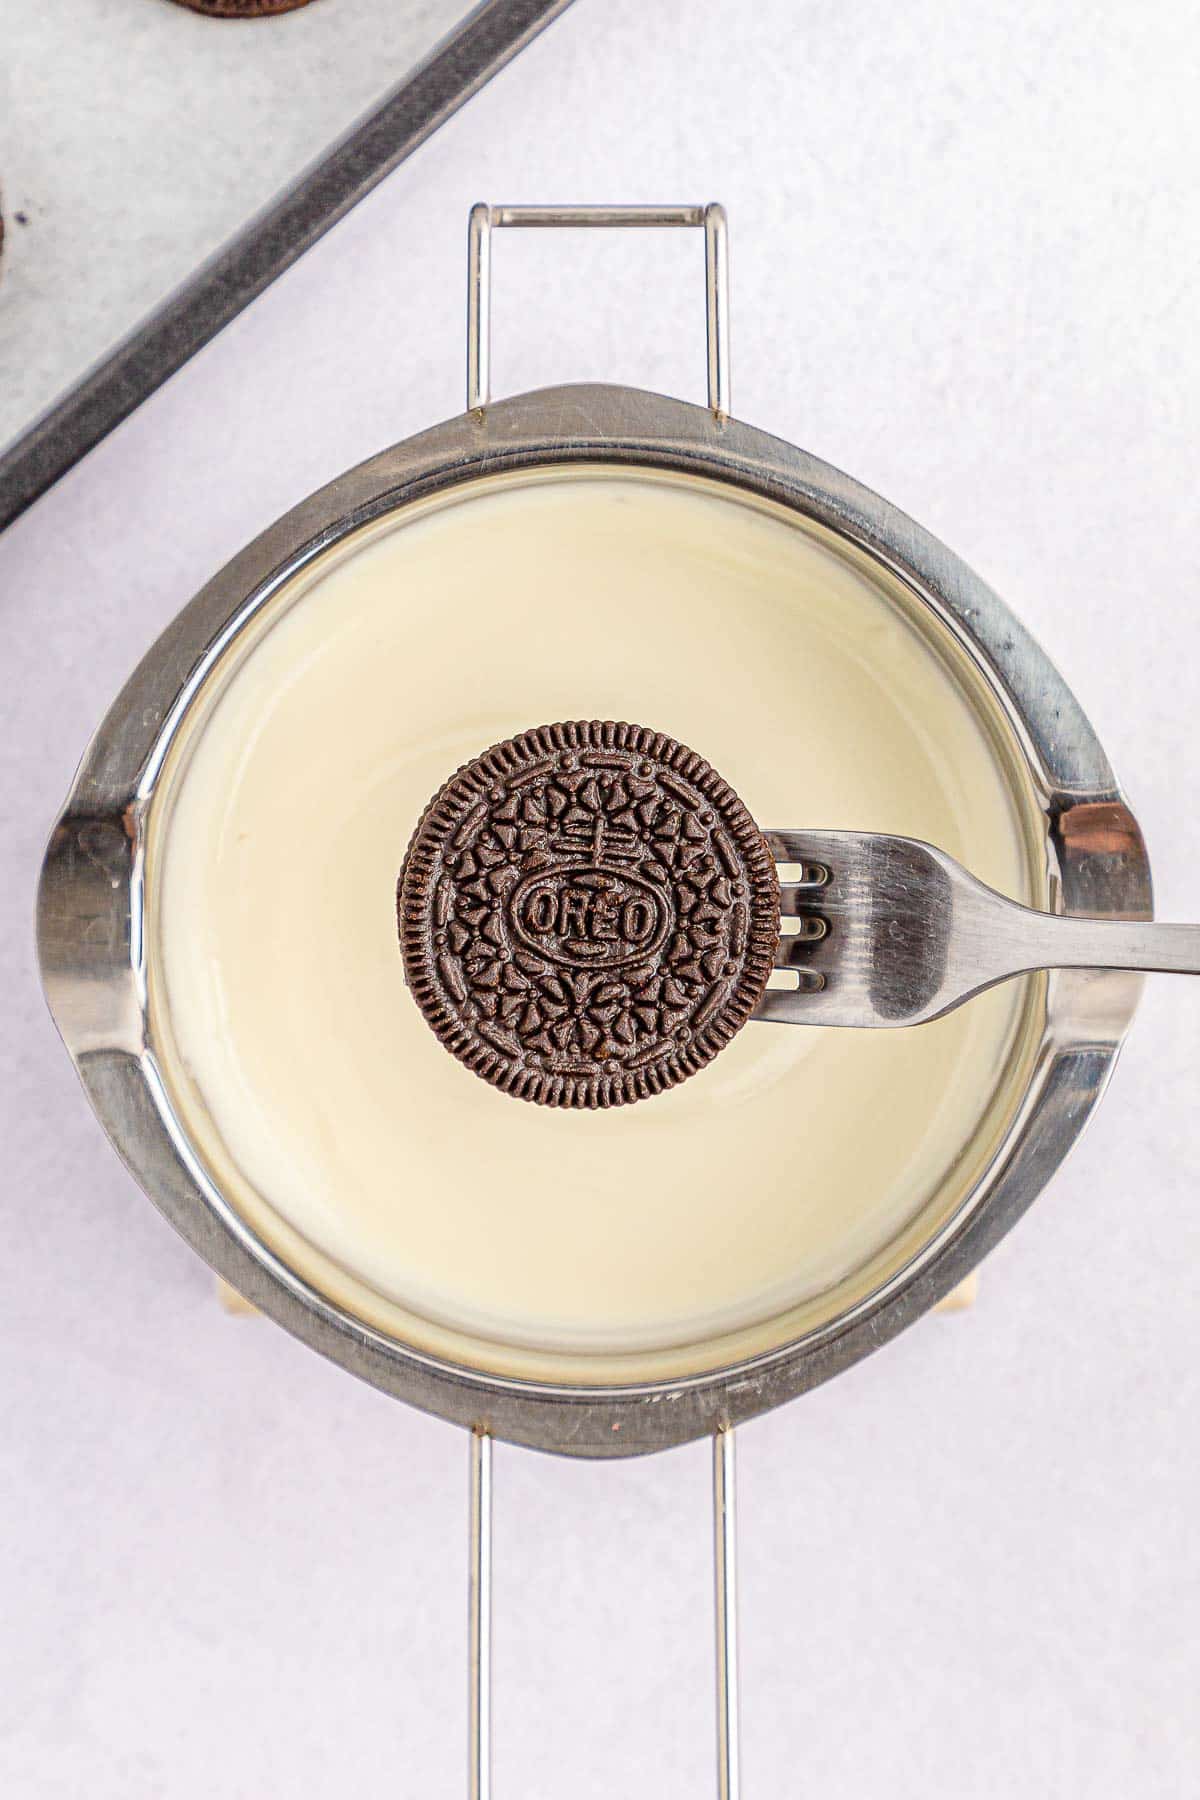 Oreo on a silver fork being held over white candy melt.